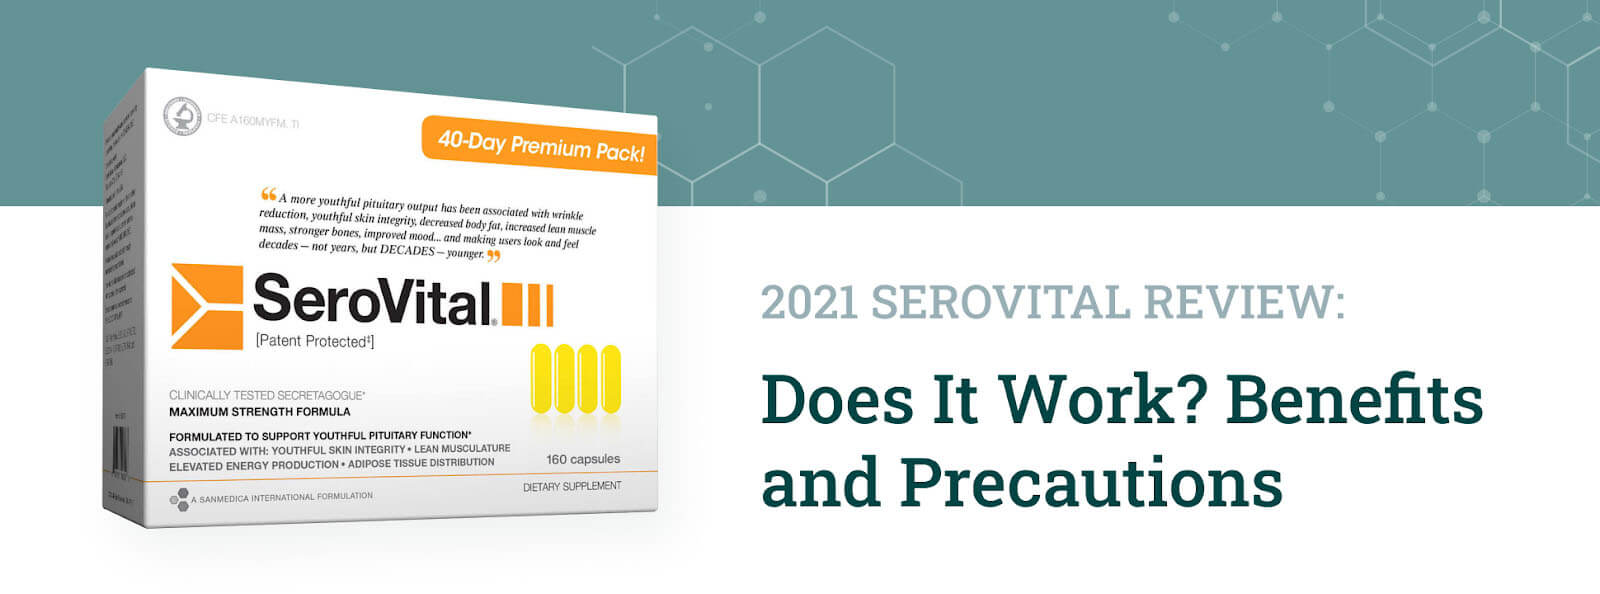 2021 SeroVital Review: Does It Work? Benefits and Precautions